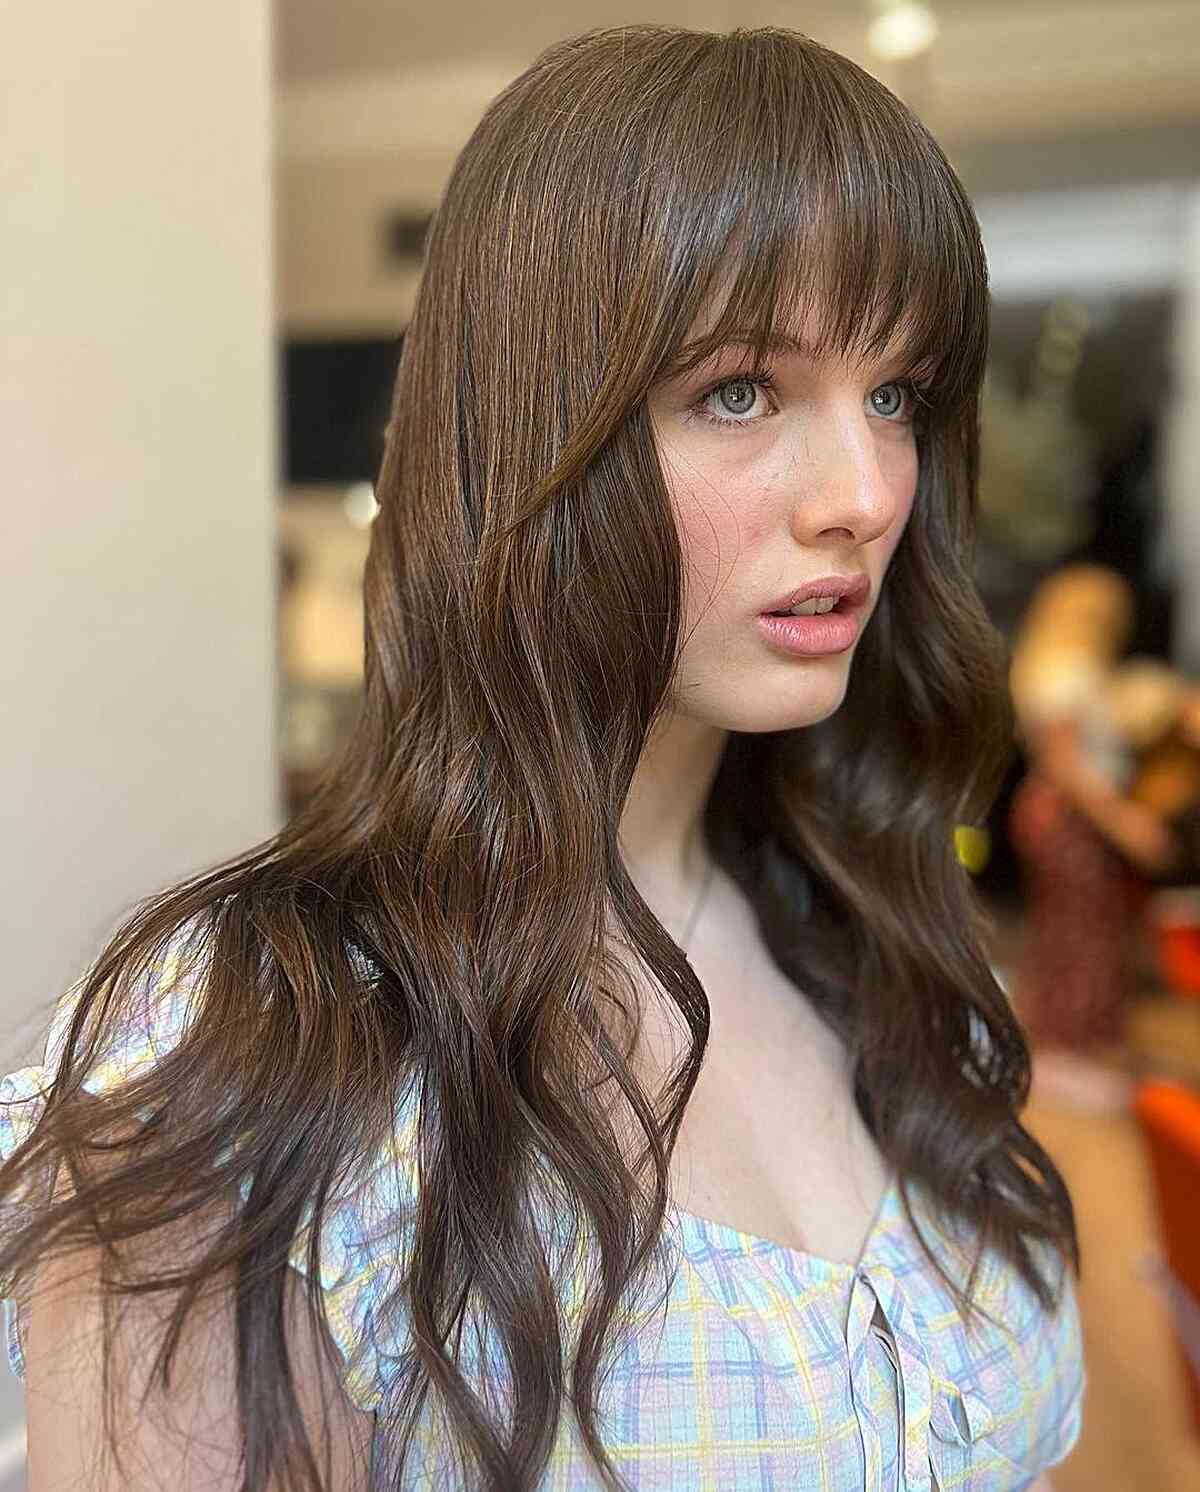 26 Coolest Ways to Get French Bangs If You Want to Try This New Hair Trend